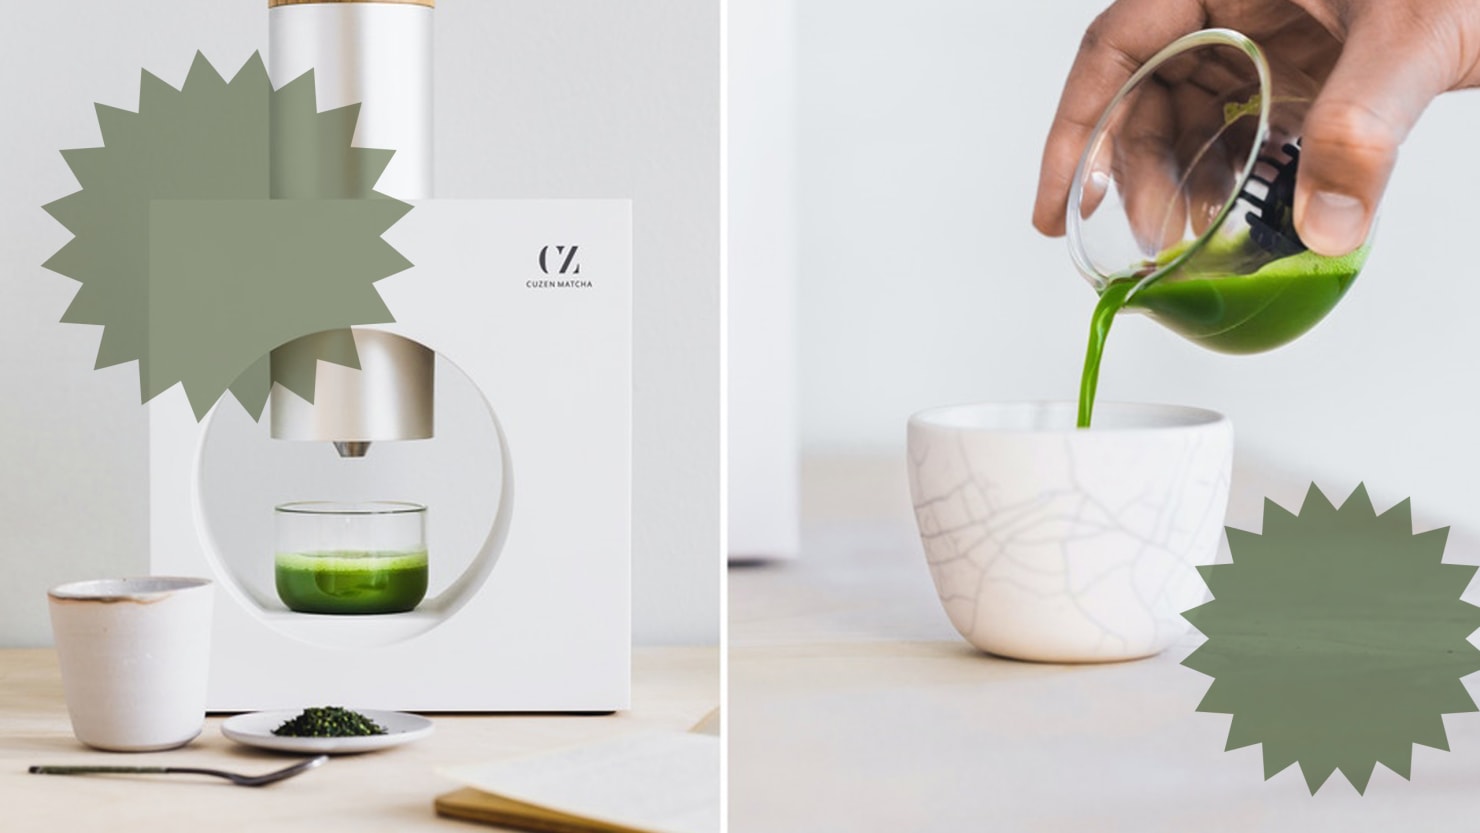 Cuzen Matcha Maker review: How to make matcha with the press of a button -  Reviewed